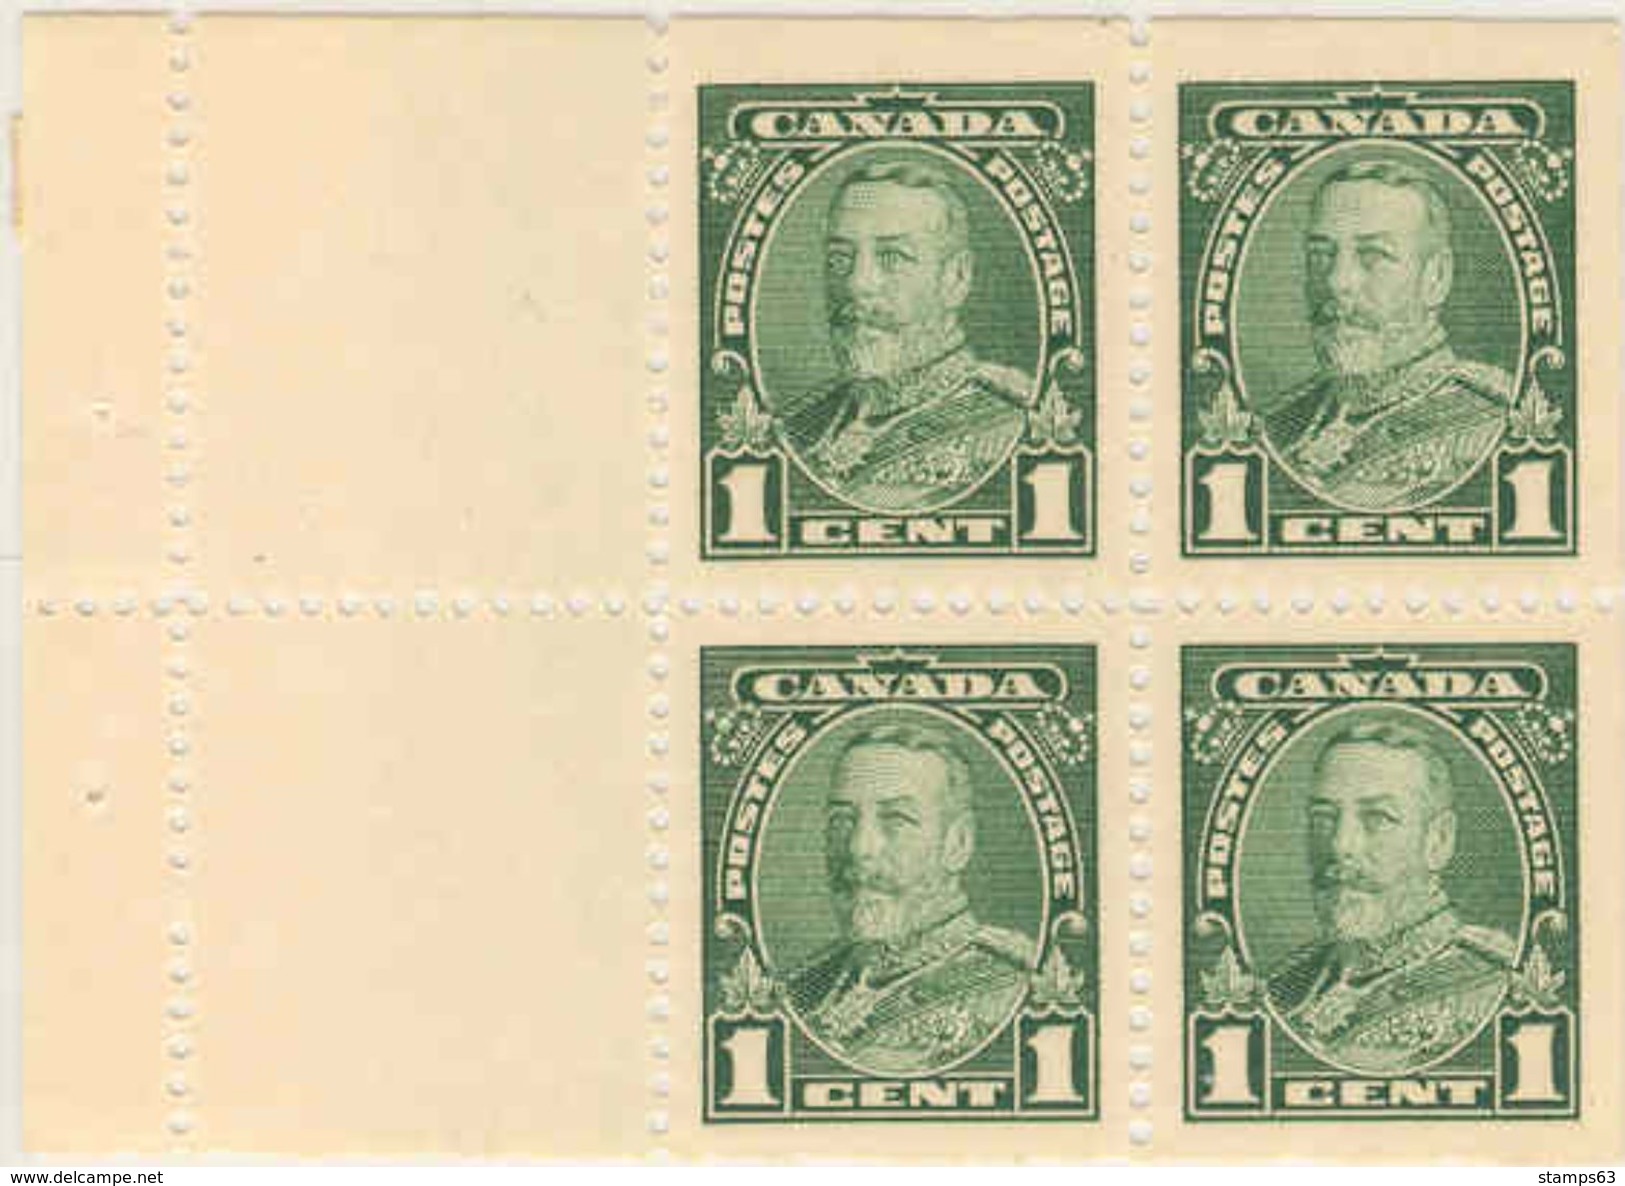 CANADA, 1935, All Bookletpanes Of  25a: 4x1c, 4x2c, 4x3c - Booklets Pages